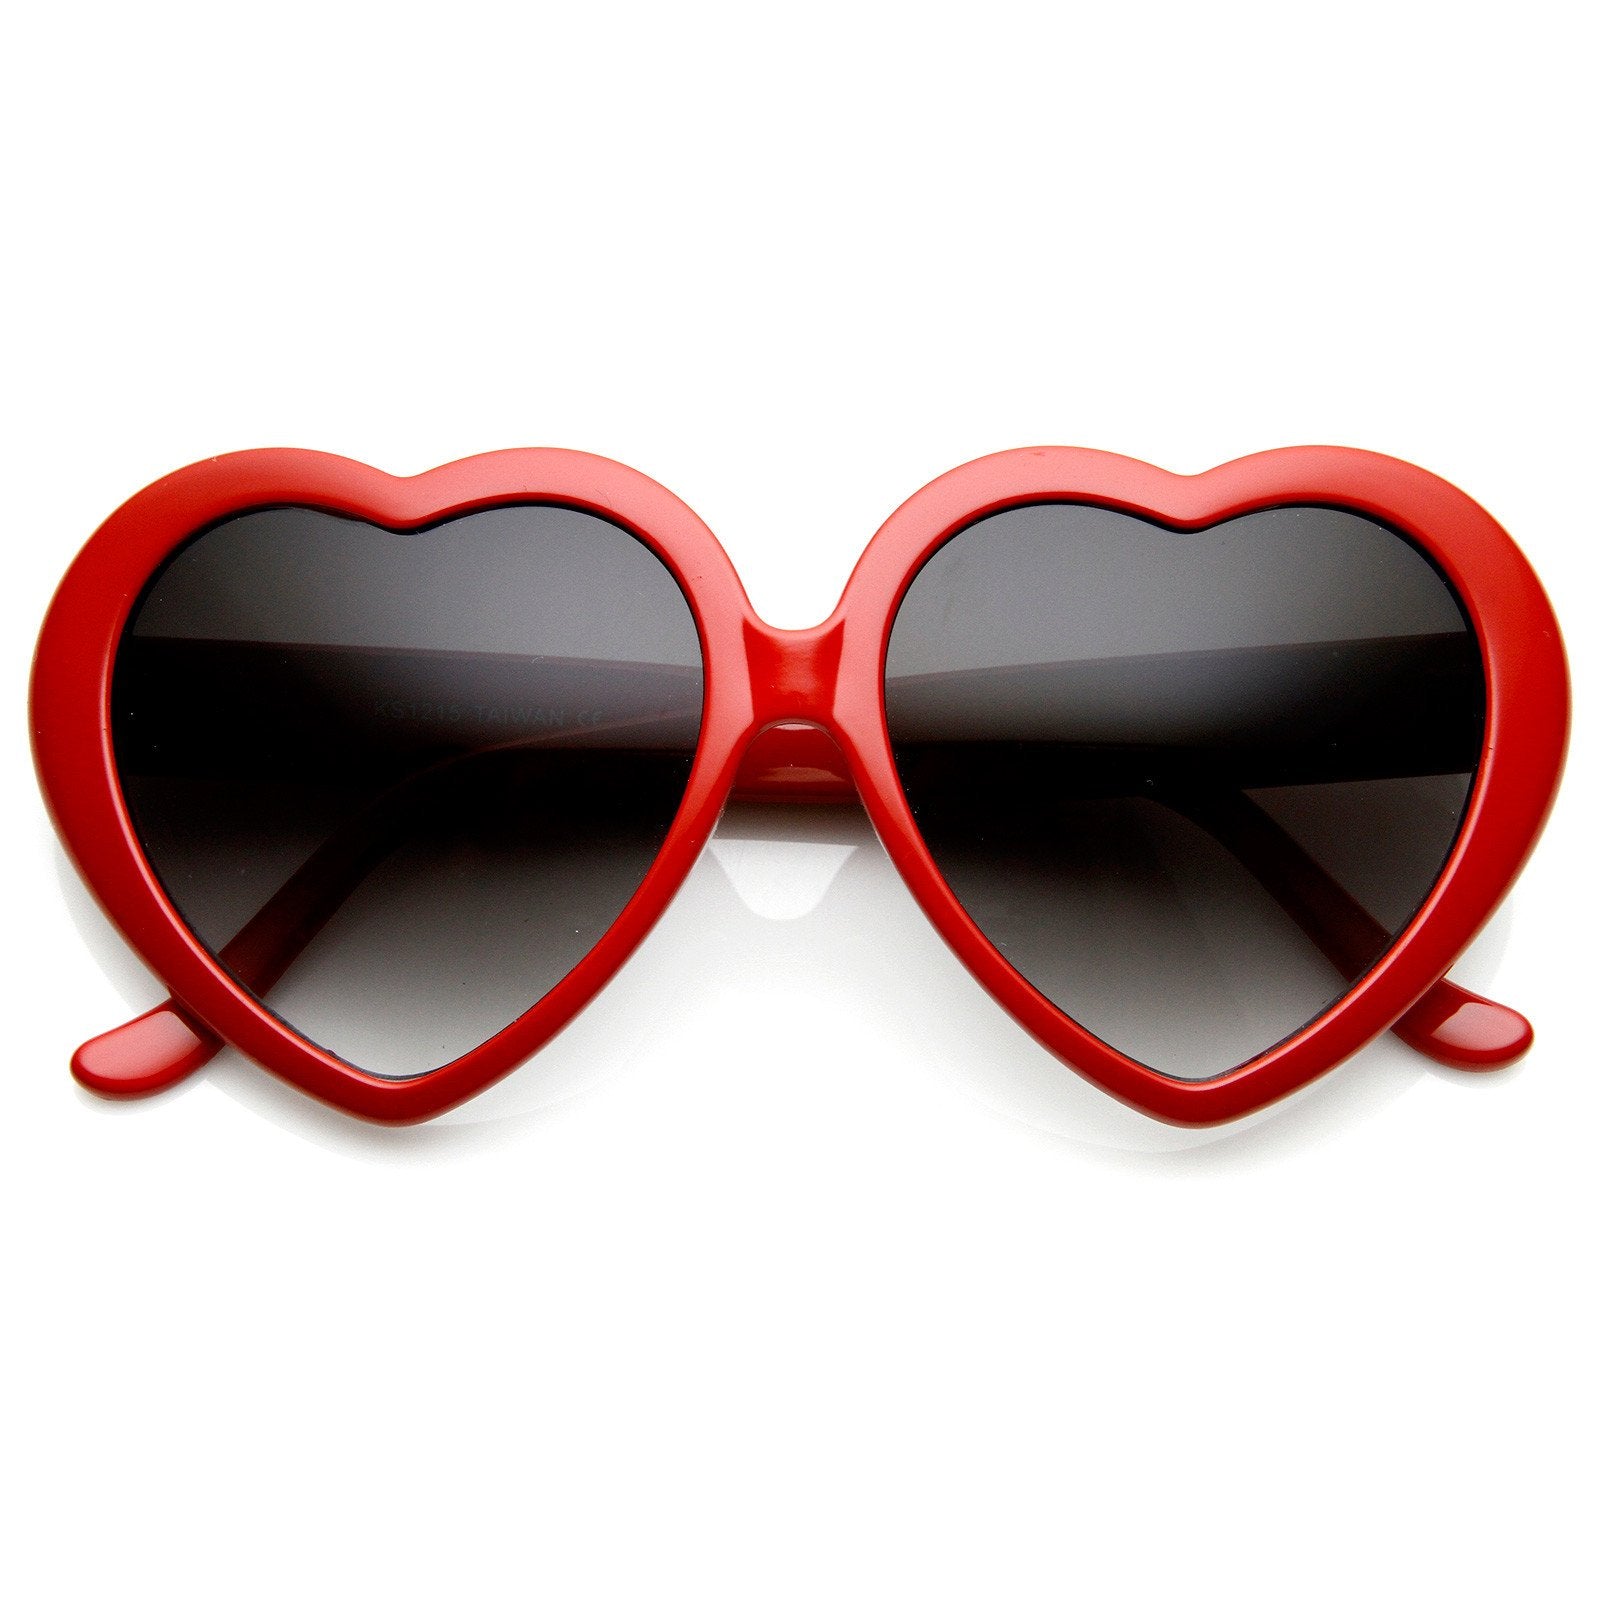  LVIOE Heart Sunglasses for Women, Polarized Heart Shaped  Sunglasses with UV Protection Heart Style Retro Glasses for Shopping :  Clothing, Shoes & Jewelry